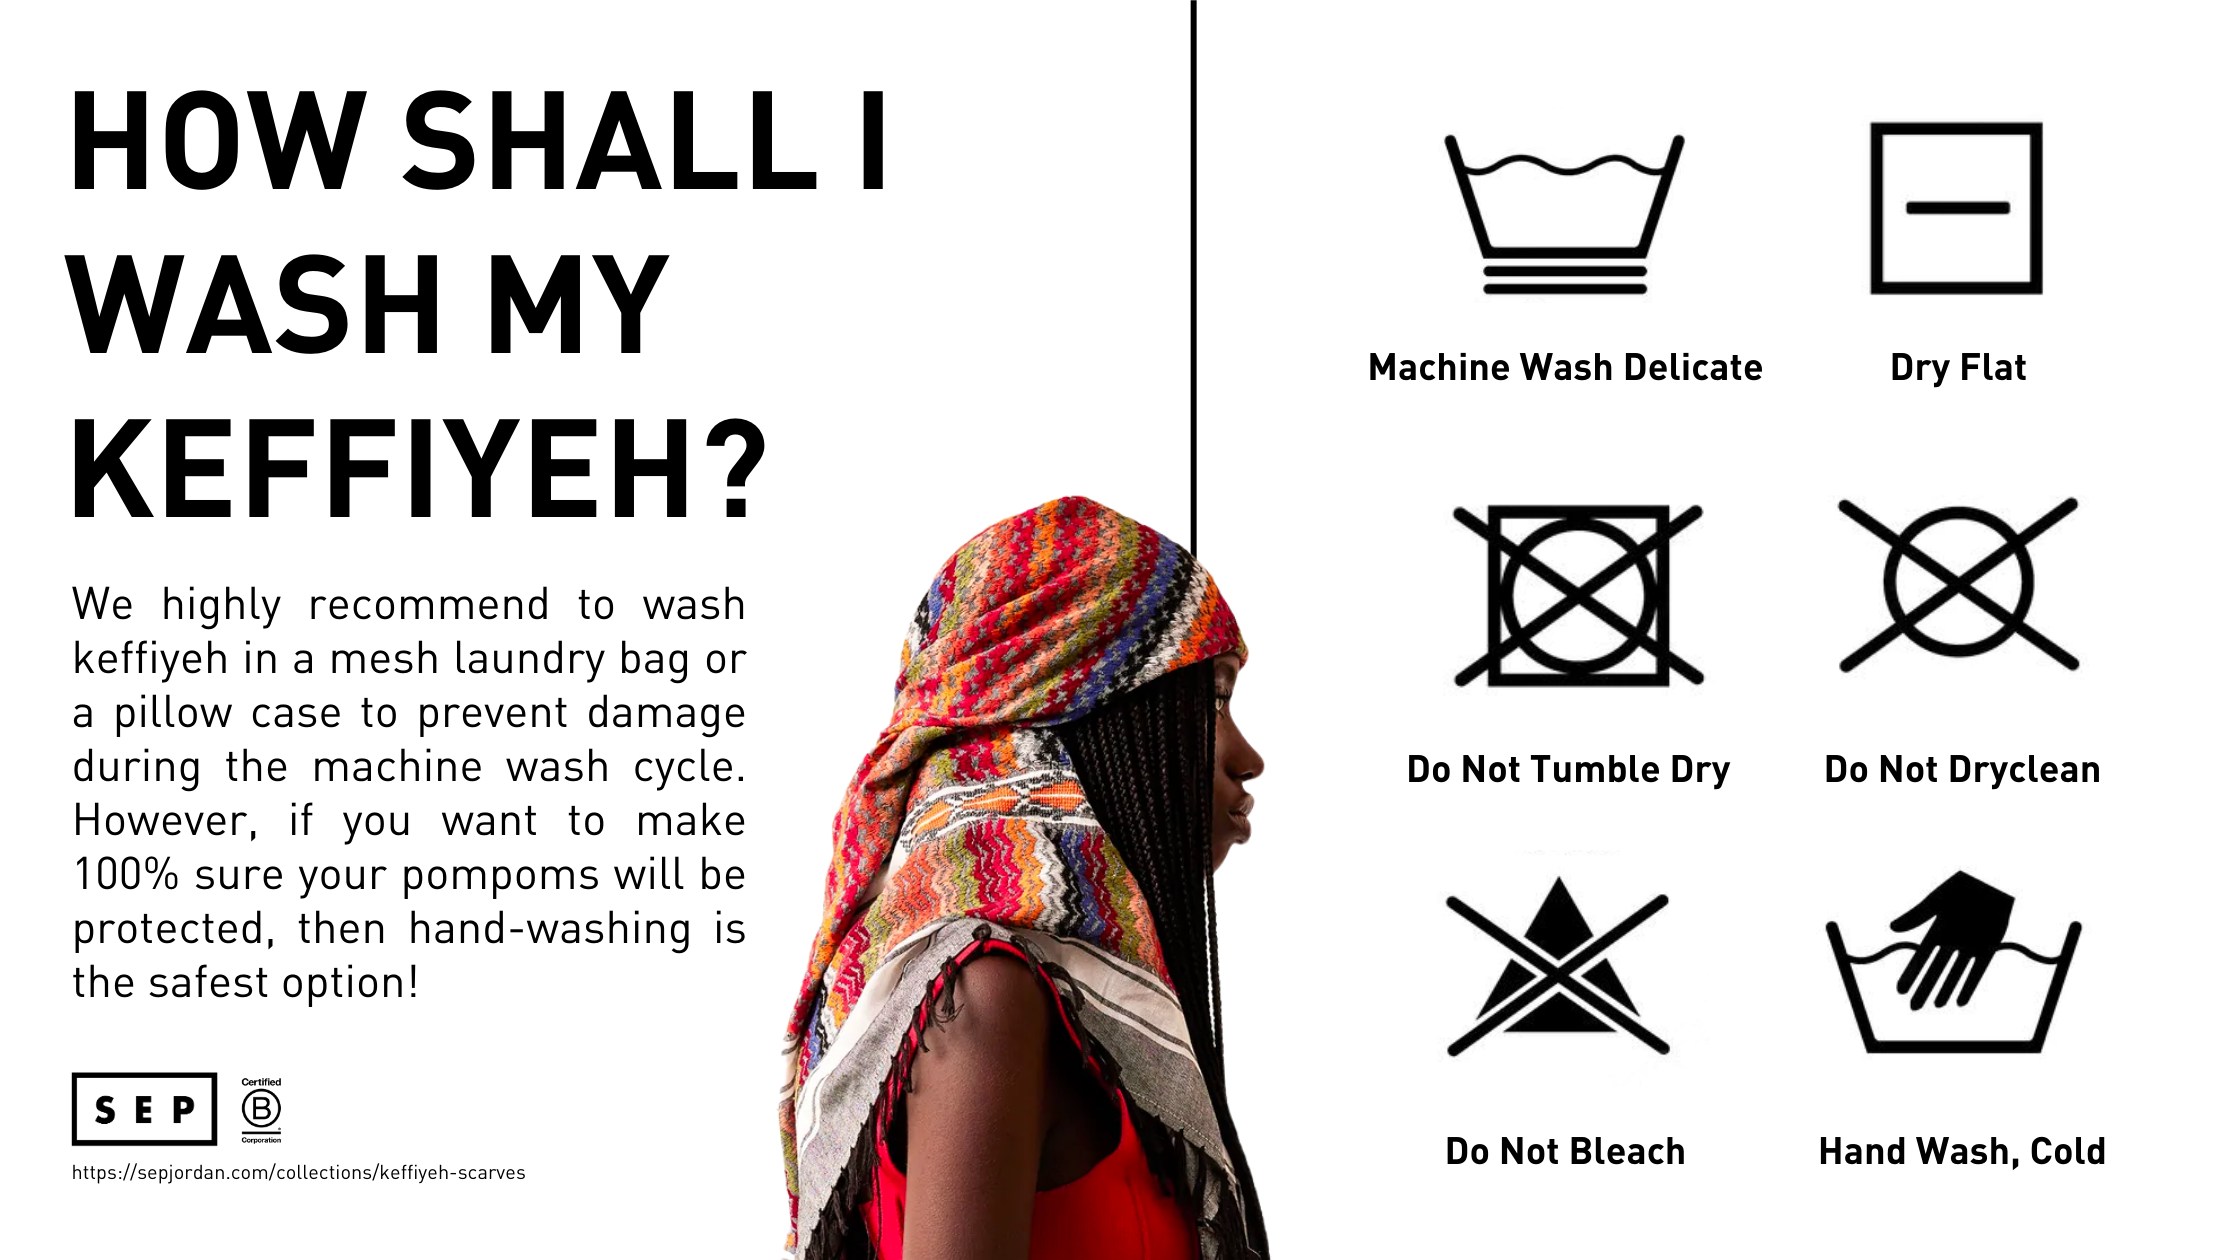 We highly recommend to wash keffiyeh in a mesh laundry bag or a pillow case to prevent damage during the machine wash cycle. However, if you want to make 100% sure your pompoms will be protected, then hand-washing is the safest option!